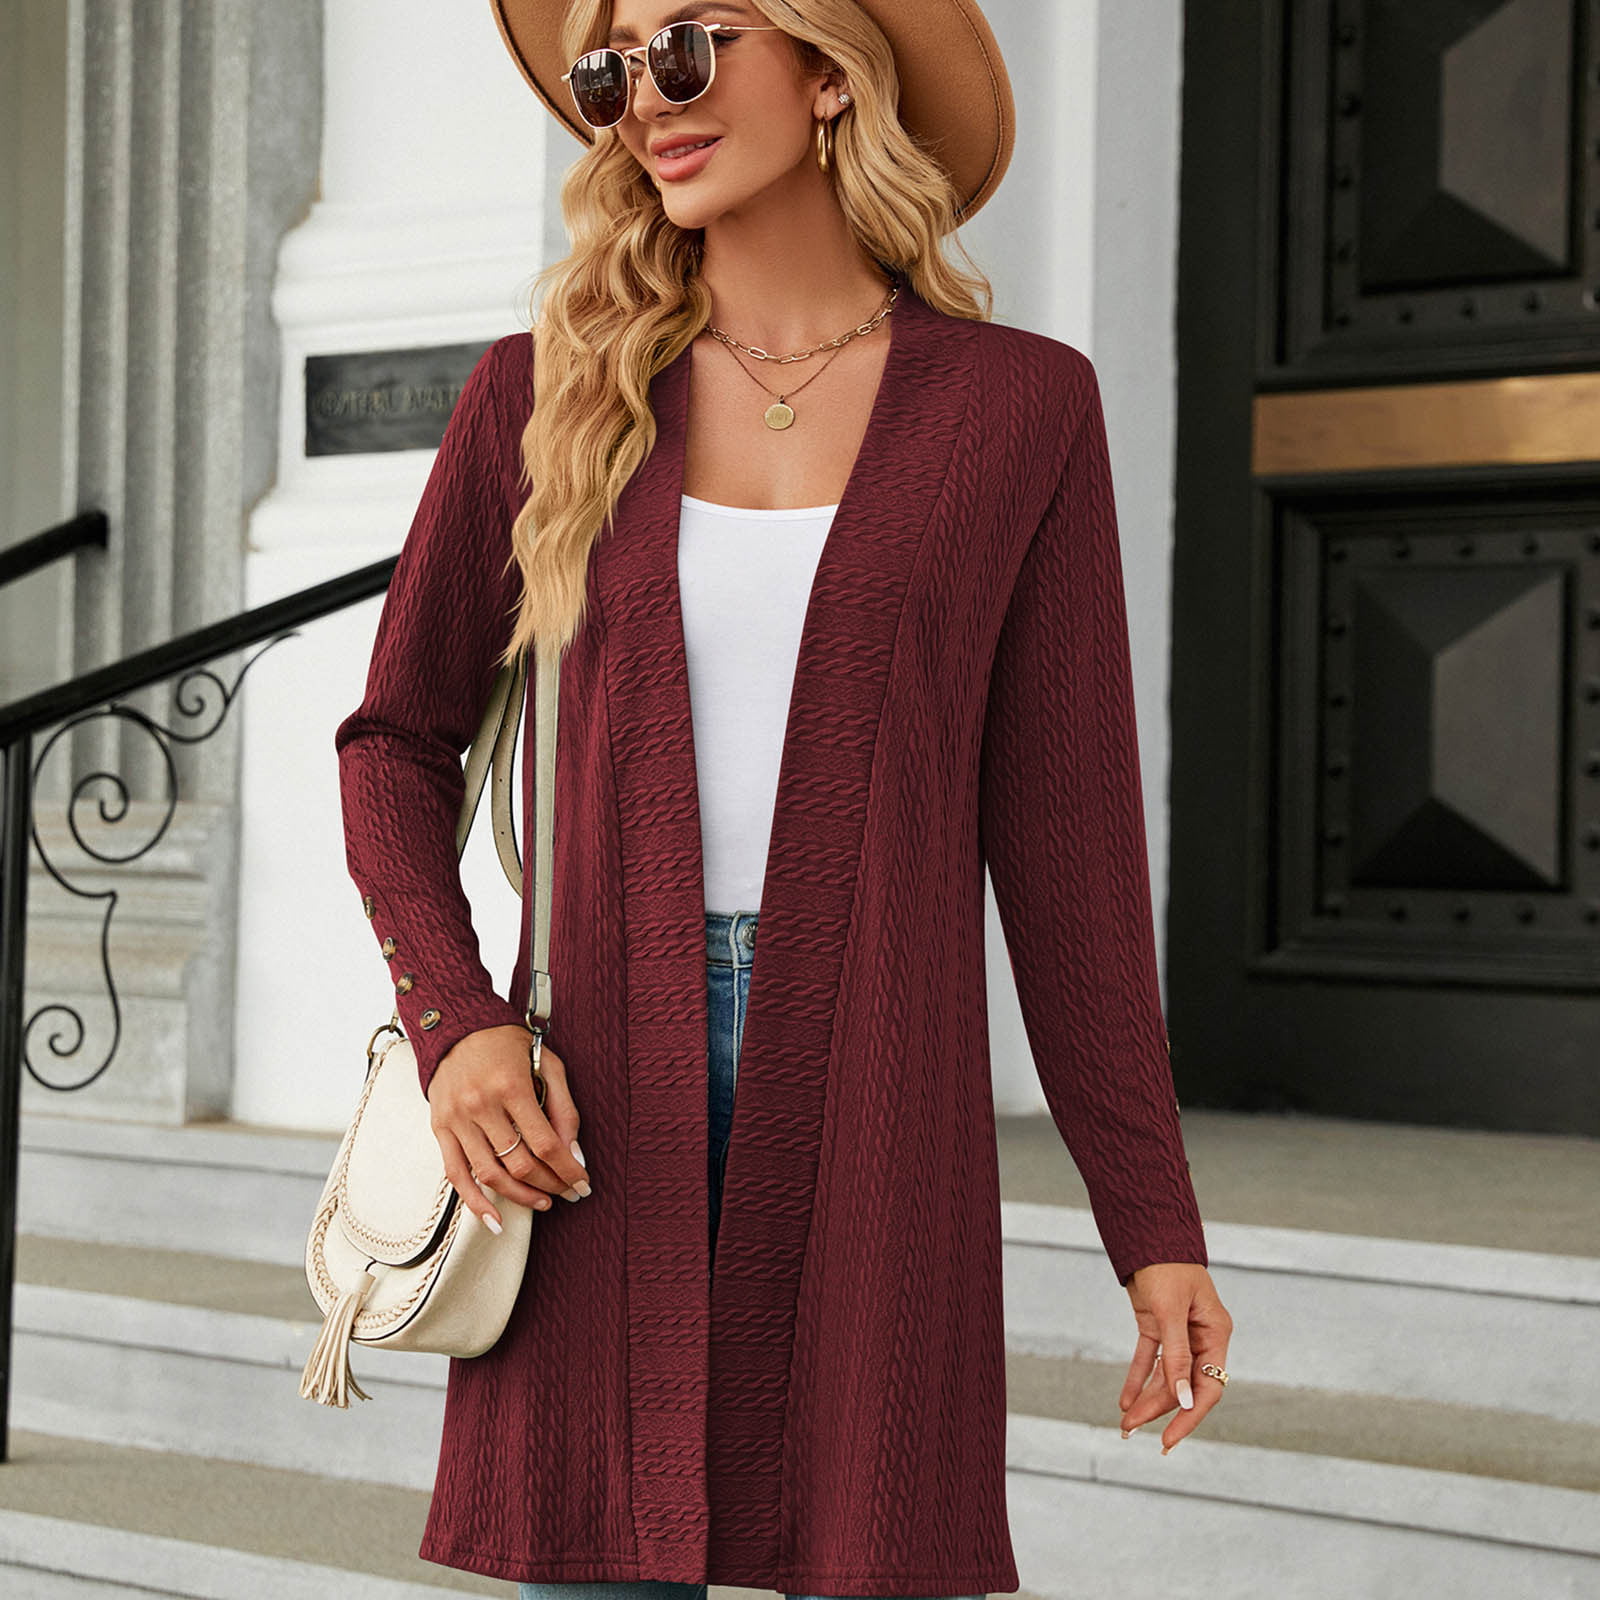  Capes For Women Dressy Long Cardigan Sweaters For Women Maroon  Cardigan Women Summer Cardigans For Women Lightweight Plus Size dollar out  of fifteen cents clearance deals cheap hoodies under a dollar 